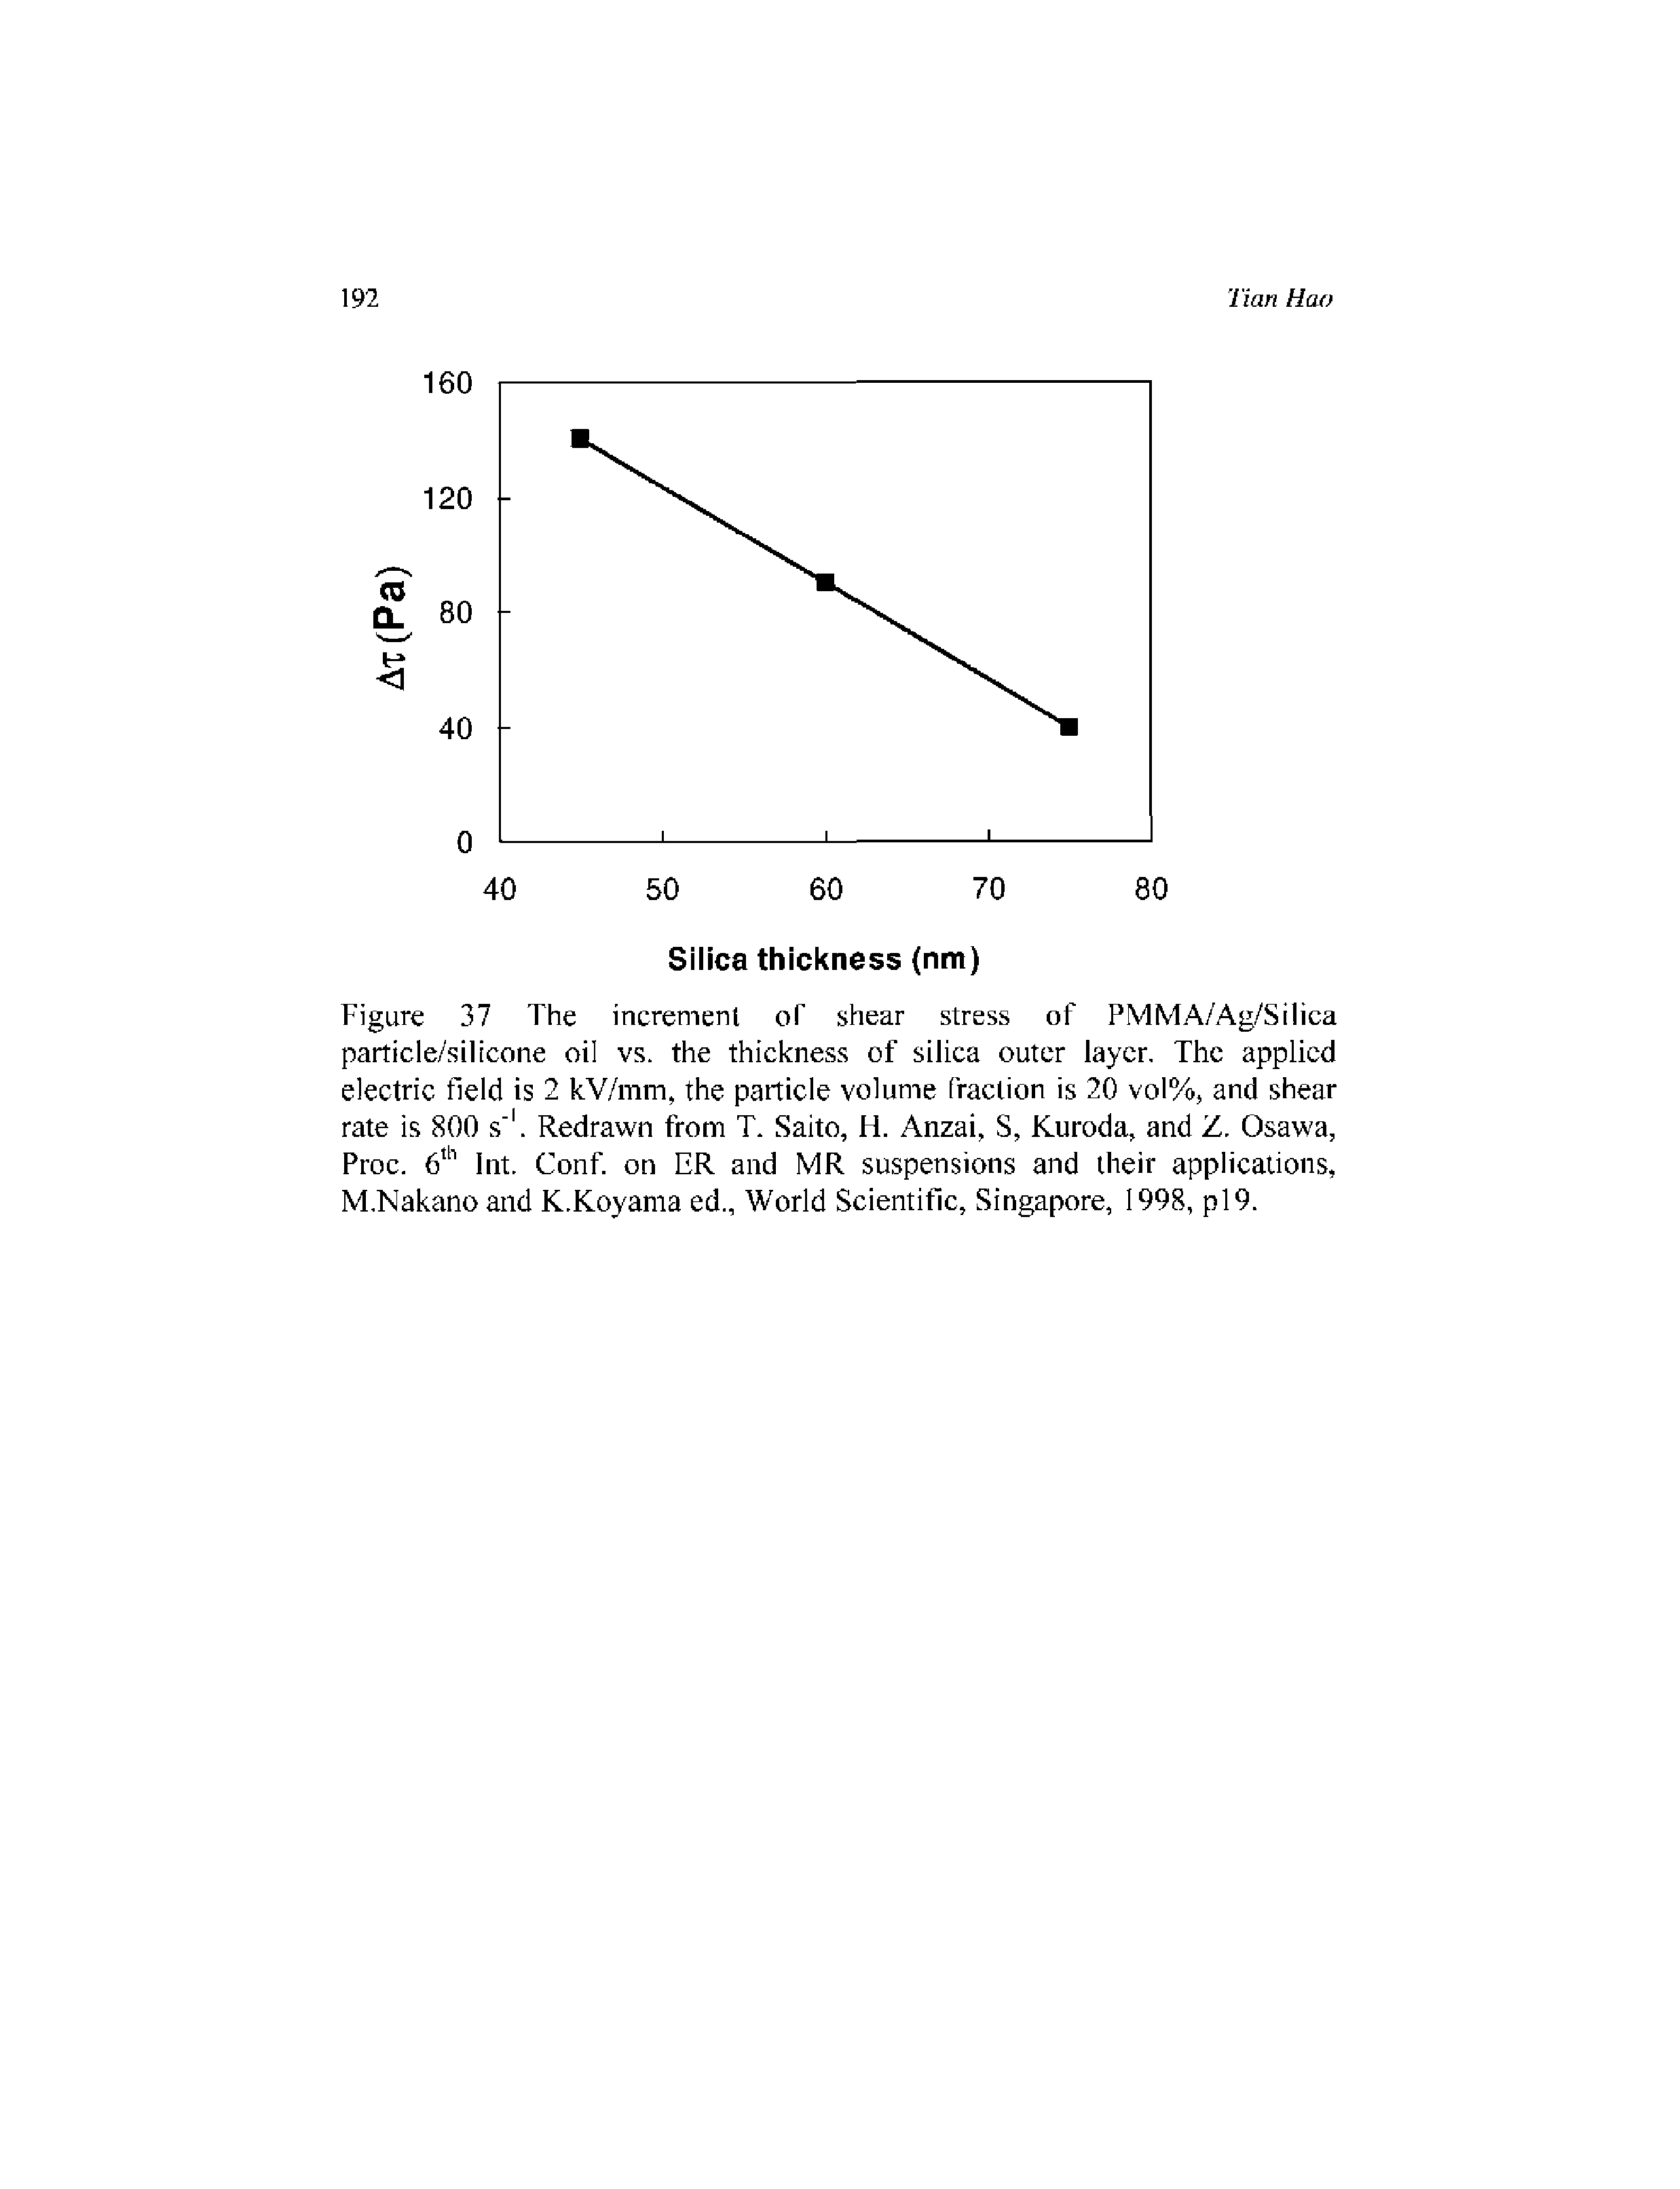 Figure 37 The incremenl oT shear stress of PMMA/Ag/Silica particle/silicone oil vs. the thickness of silica outer layer. The applied electric field is 2 kV/mm, the particle volume fraction is 20 vol%, and shear rate is 800 s. Redrawn from T. Saito, H. Anzai, S, Kuroda, and Z. Osawa, Proc. 6" Int. Conf on ER and MR suspensions and their applications, M.Nakano and K.Koyama ed., World Scientific, Singapore, 1998, pi9.